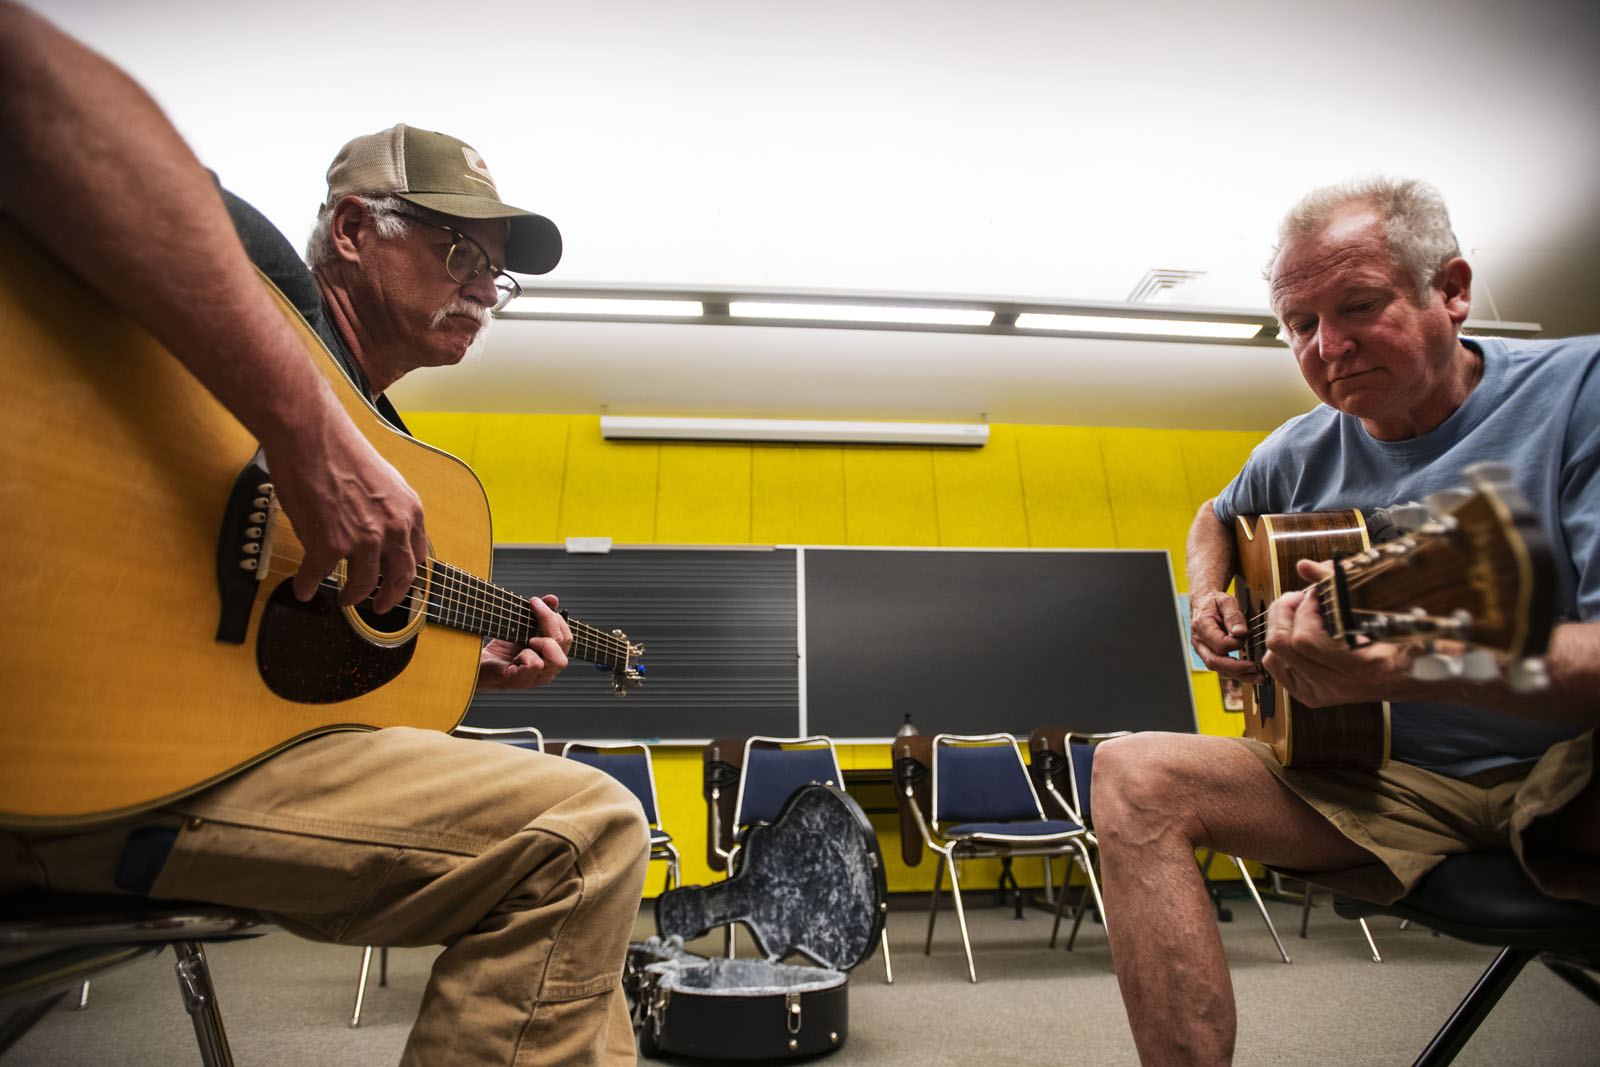 Kenn Lee and Nashville guitarist/singer/producer Jeff White, right, play a melody during their one-on-one session at the Bluegrass Workshop in Packard Hall on June 26, 2018.